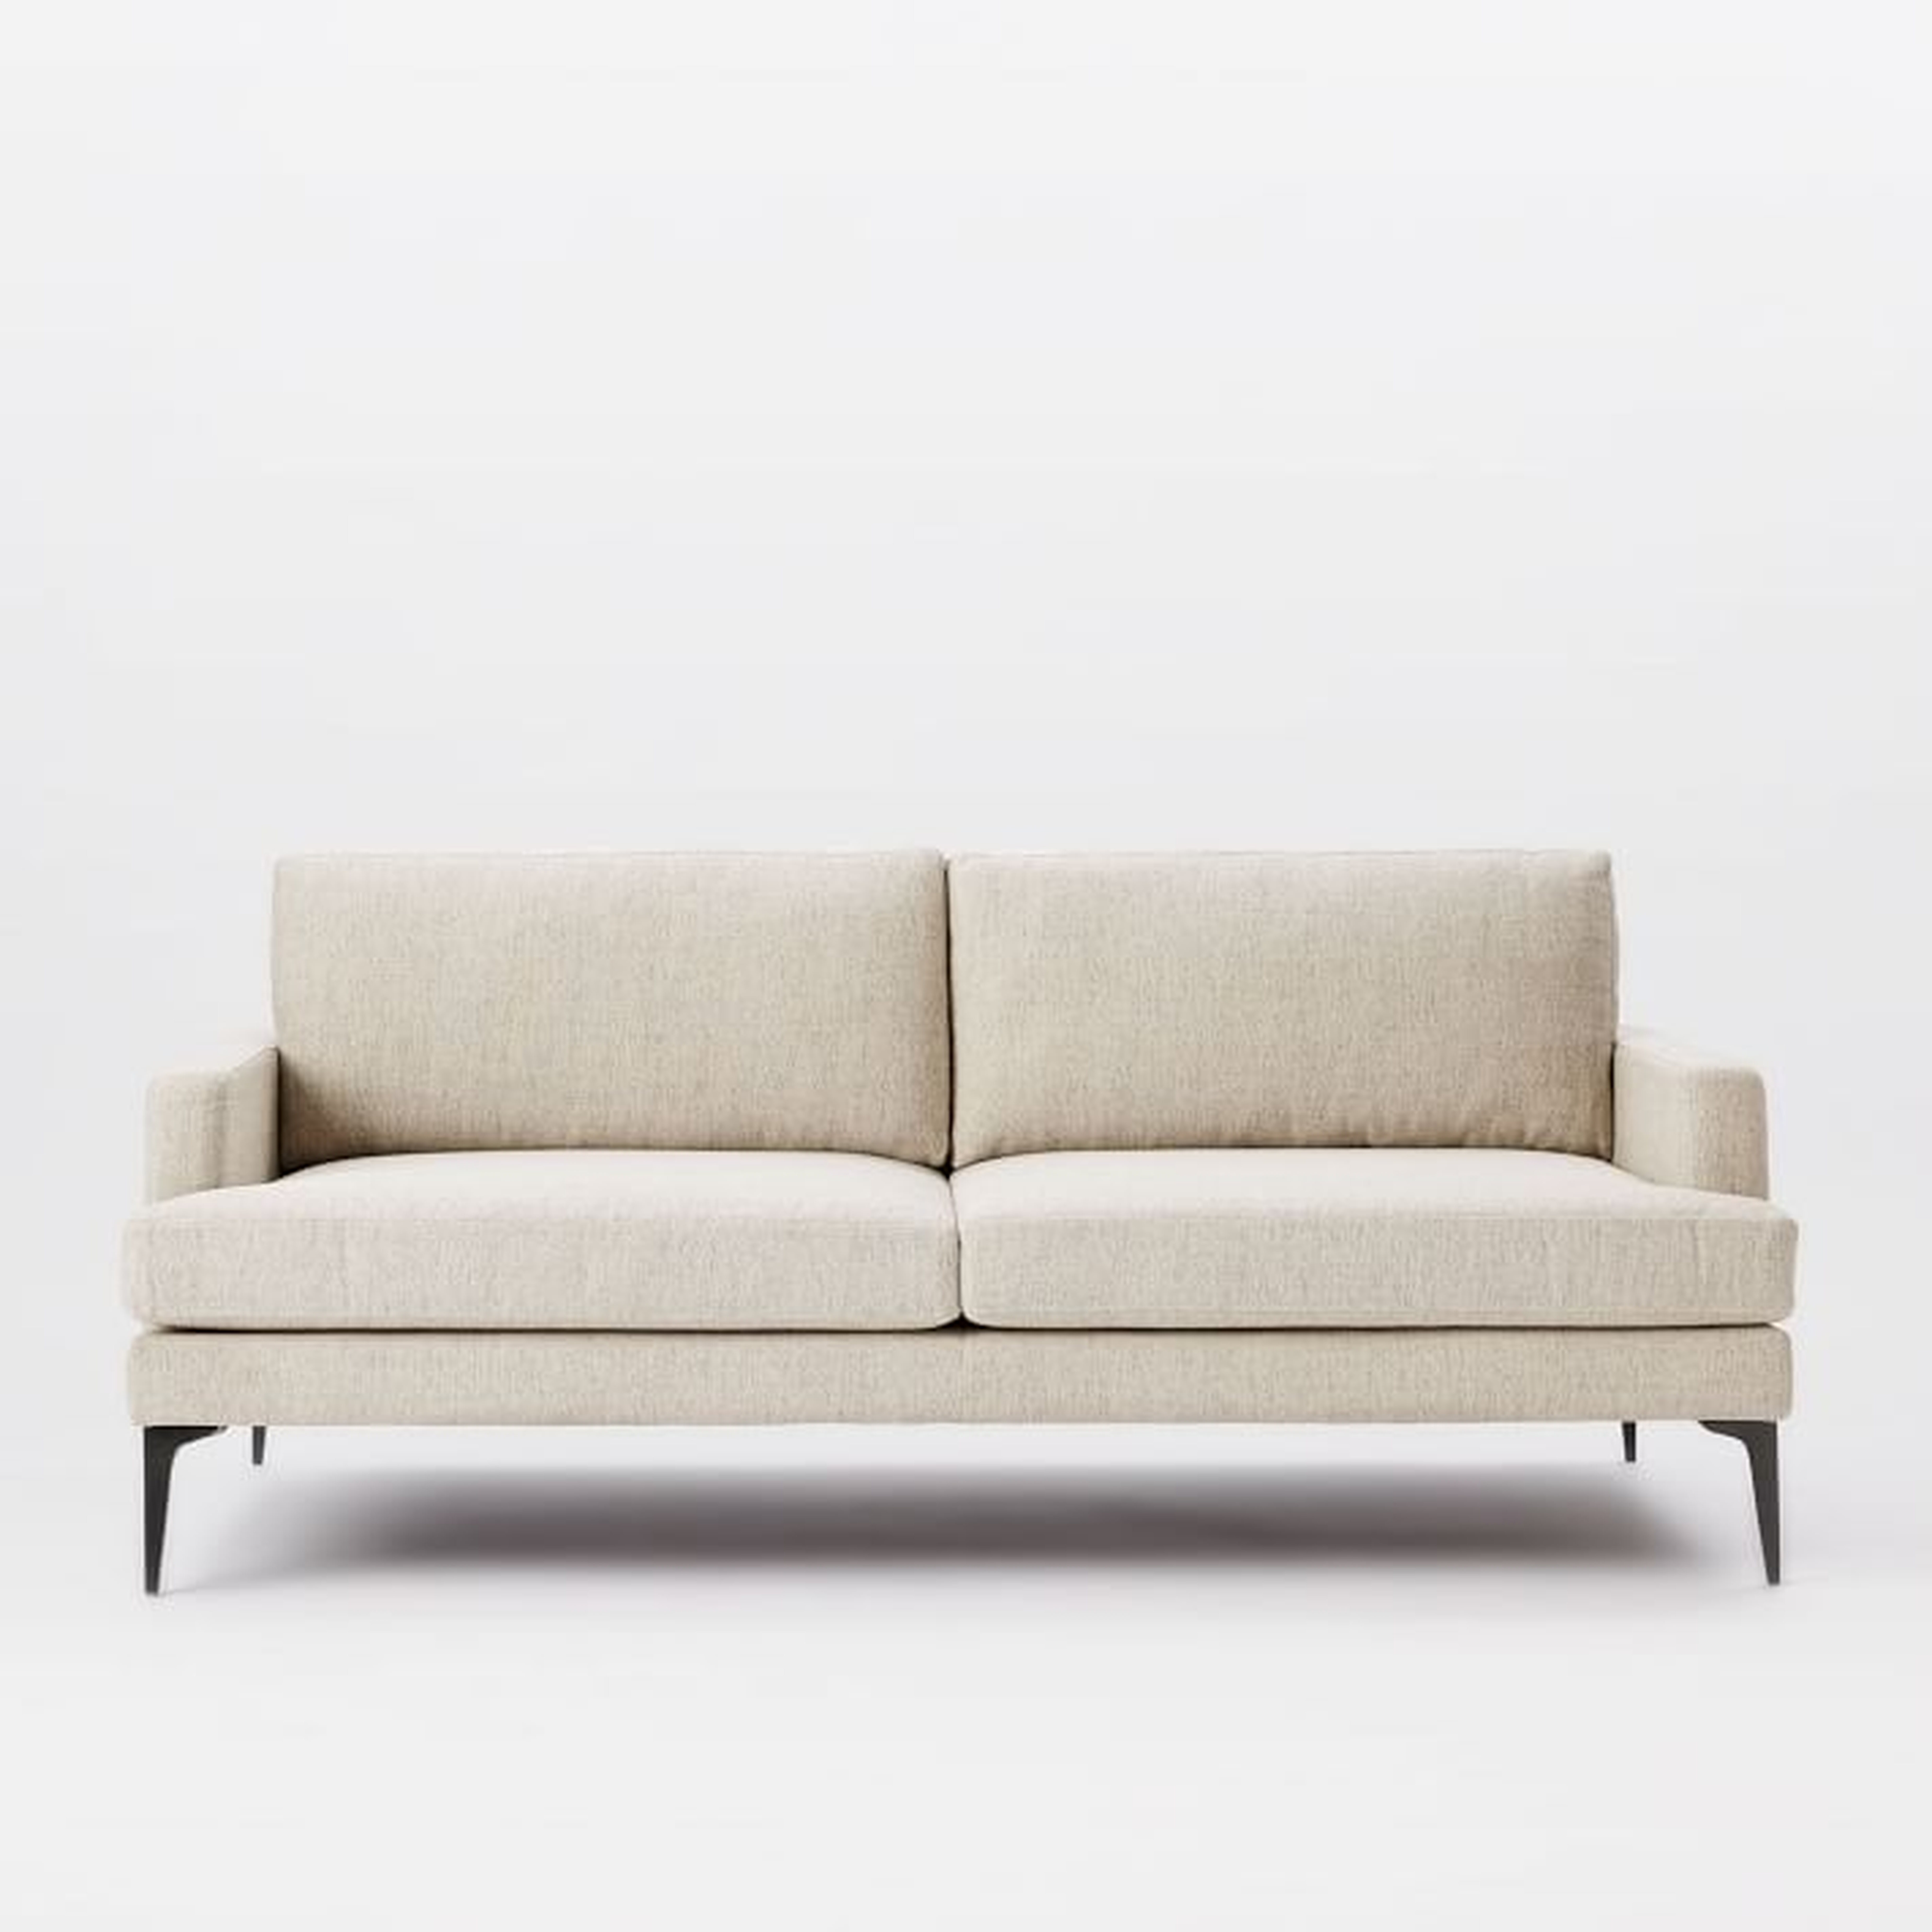 Andes 76.5" Sofa, Twill, Stone - West Elm